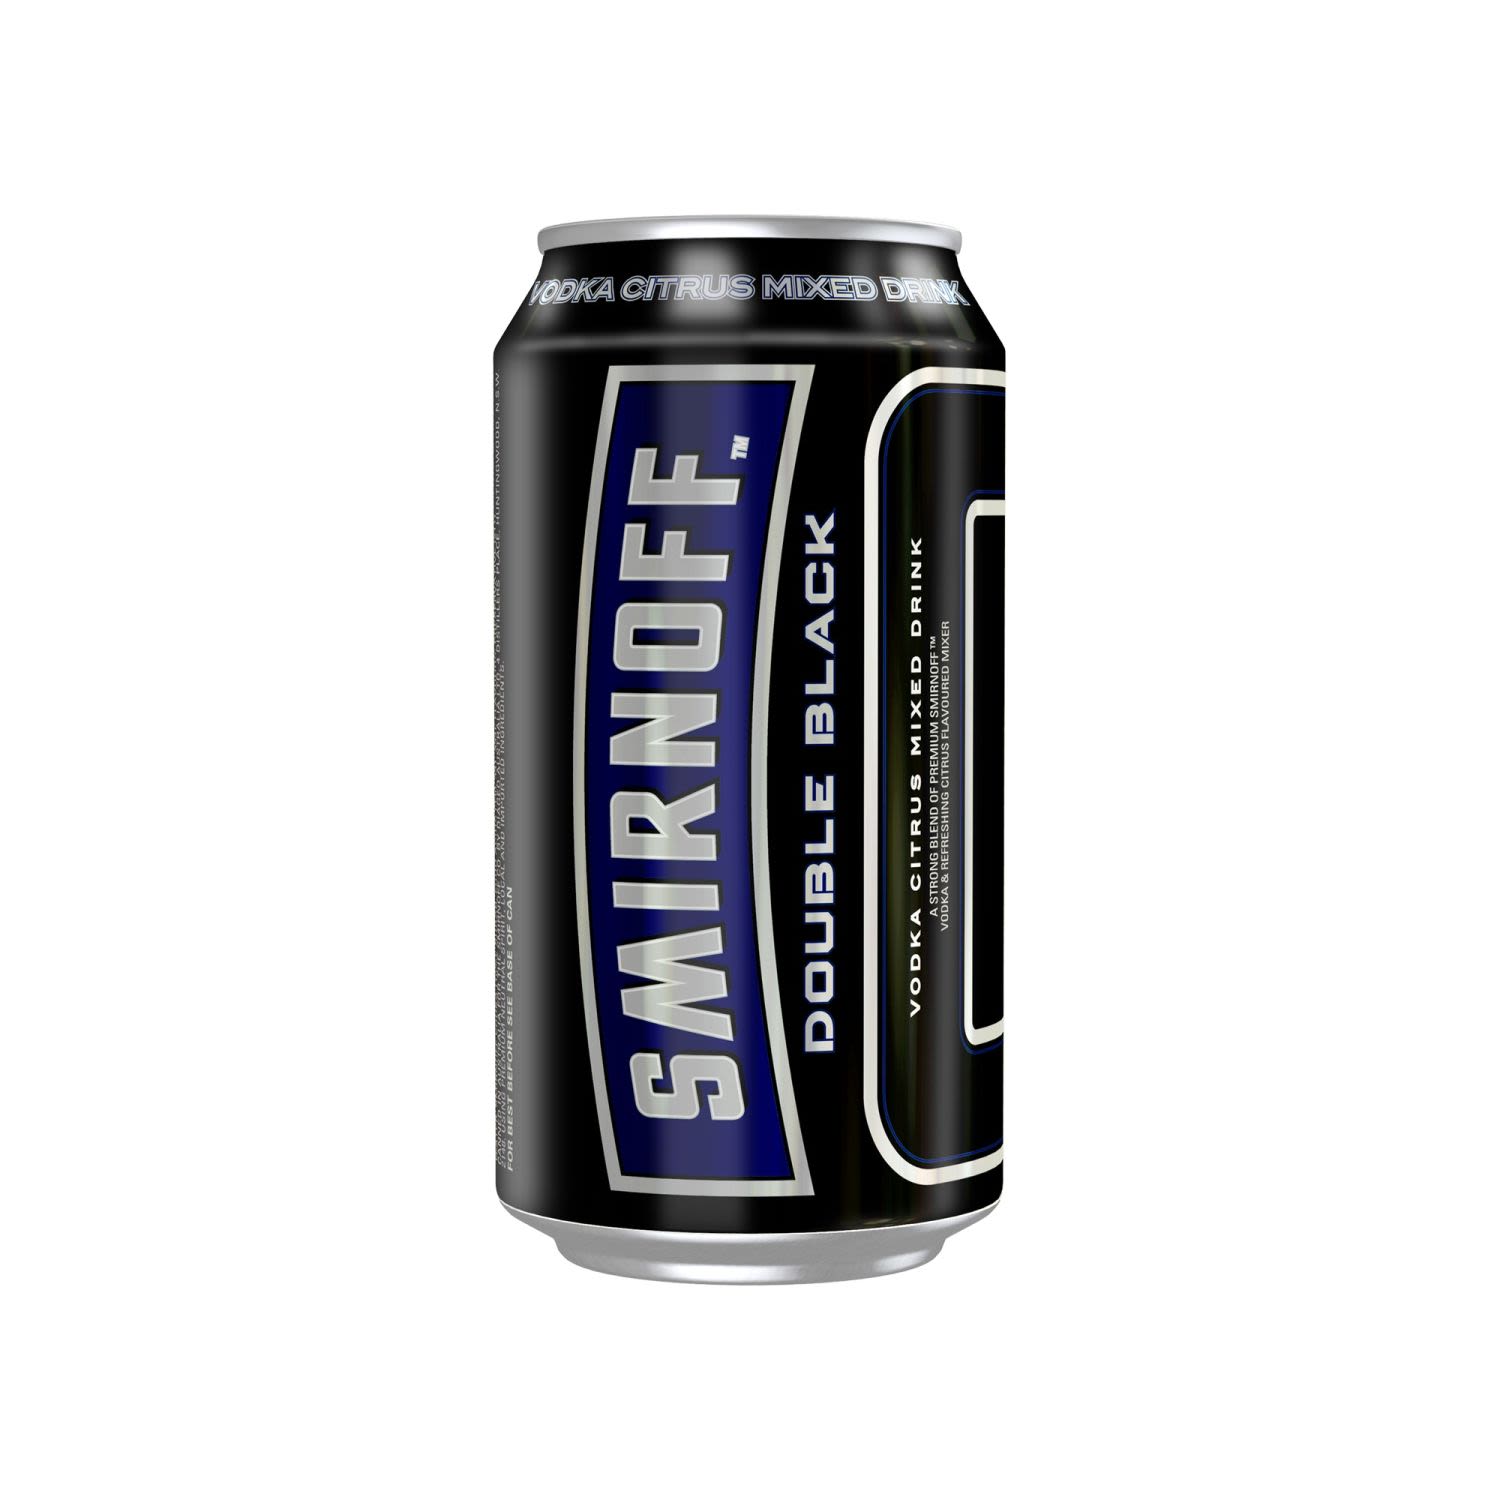 With an extra strong blend of Smirnoff Vodka, Smirnoff Ice Double Black combines a tangy citrus flavoured soda to create a refreshing drink<br /> <br />Alcohol Volume: 6.50%<br /><br />Pack Format: Can<br /><br />Standard Drinks: 1.9</br /><br />Pack Type: Can<br />